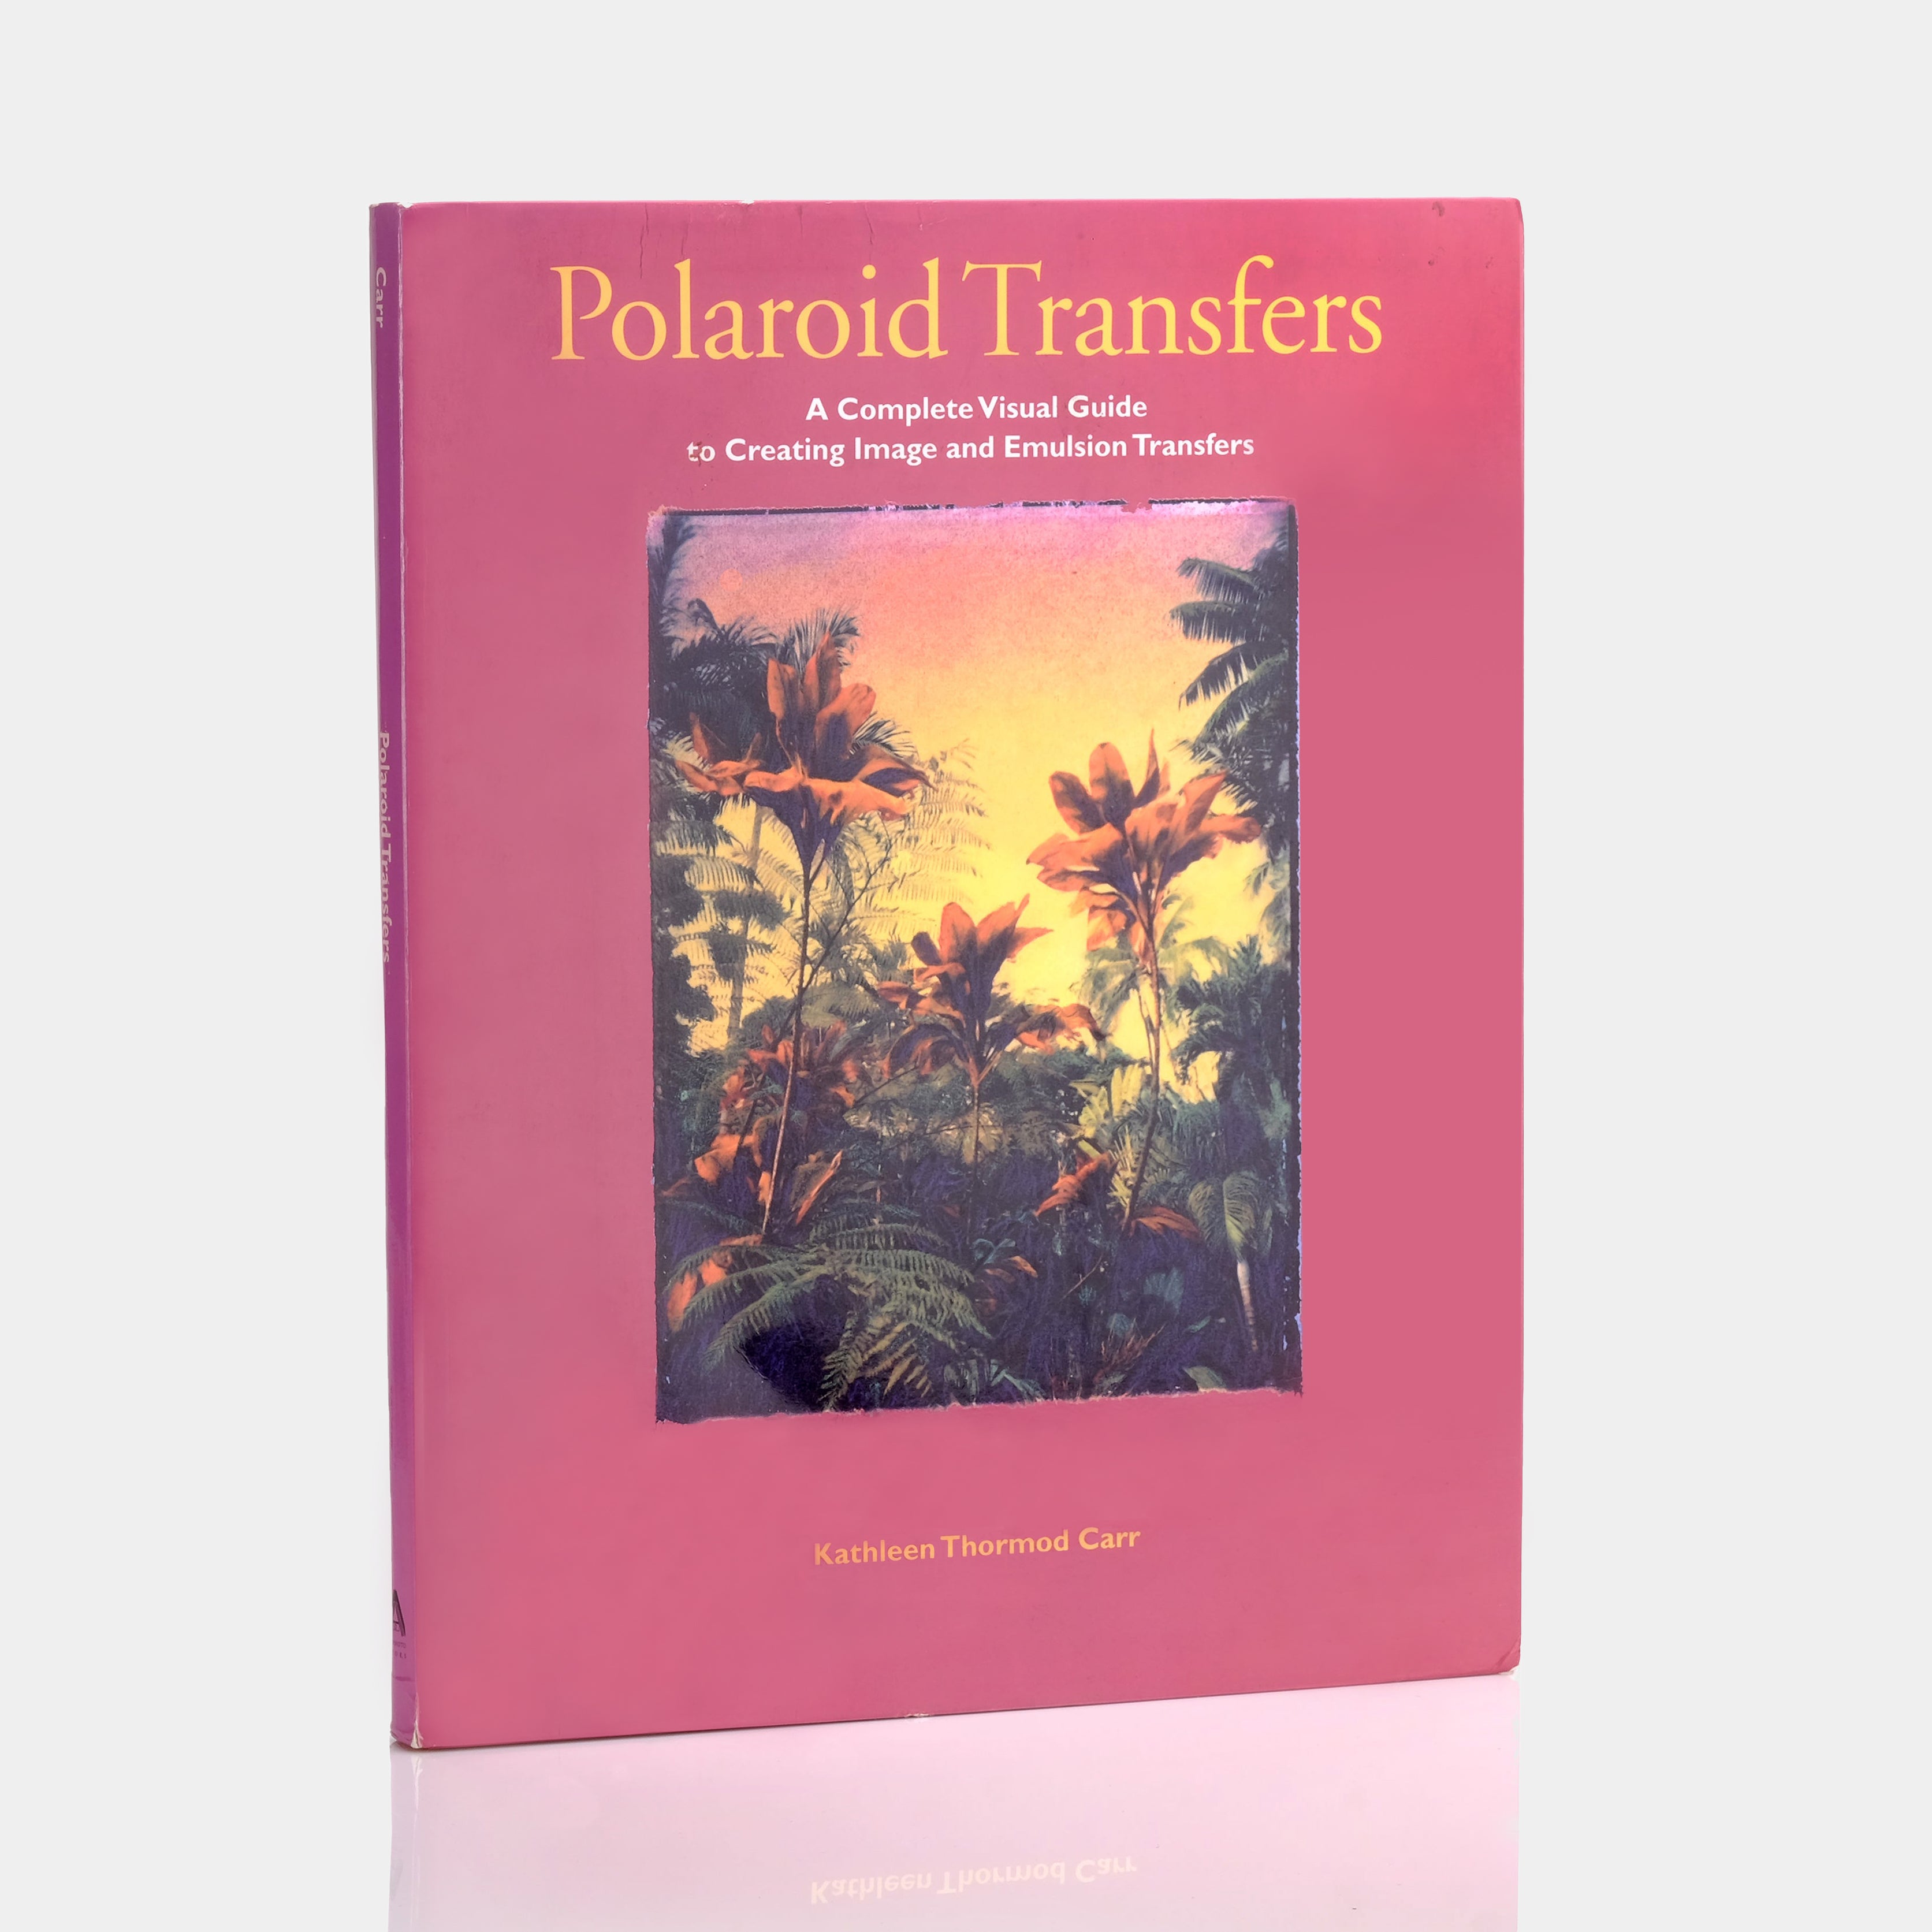 Polaroid Transfers: A Complete Visual Guide to Creating Image and Emulsion Transfers by Kathleen Thormod Carr Book